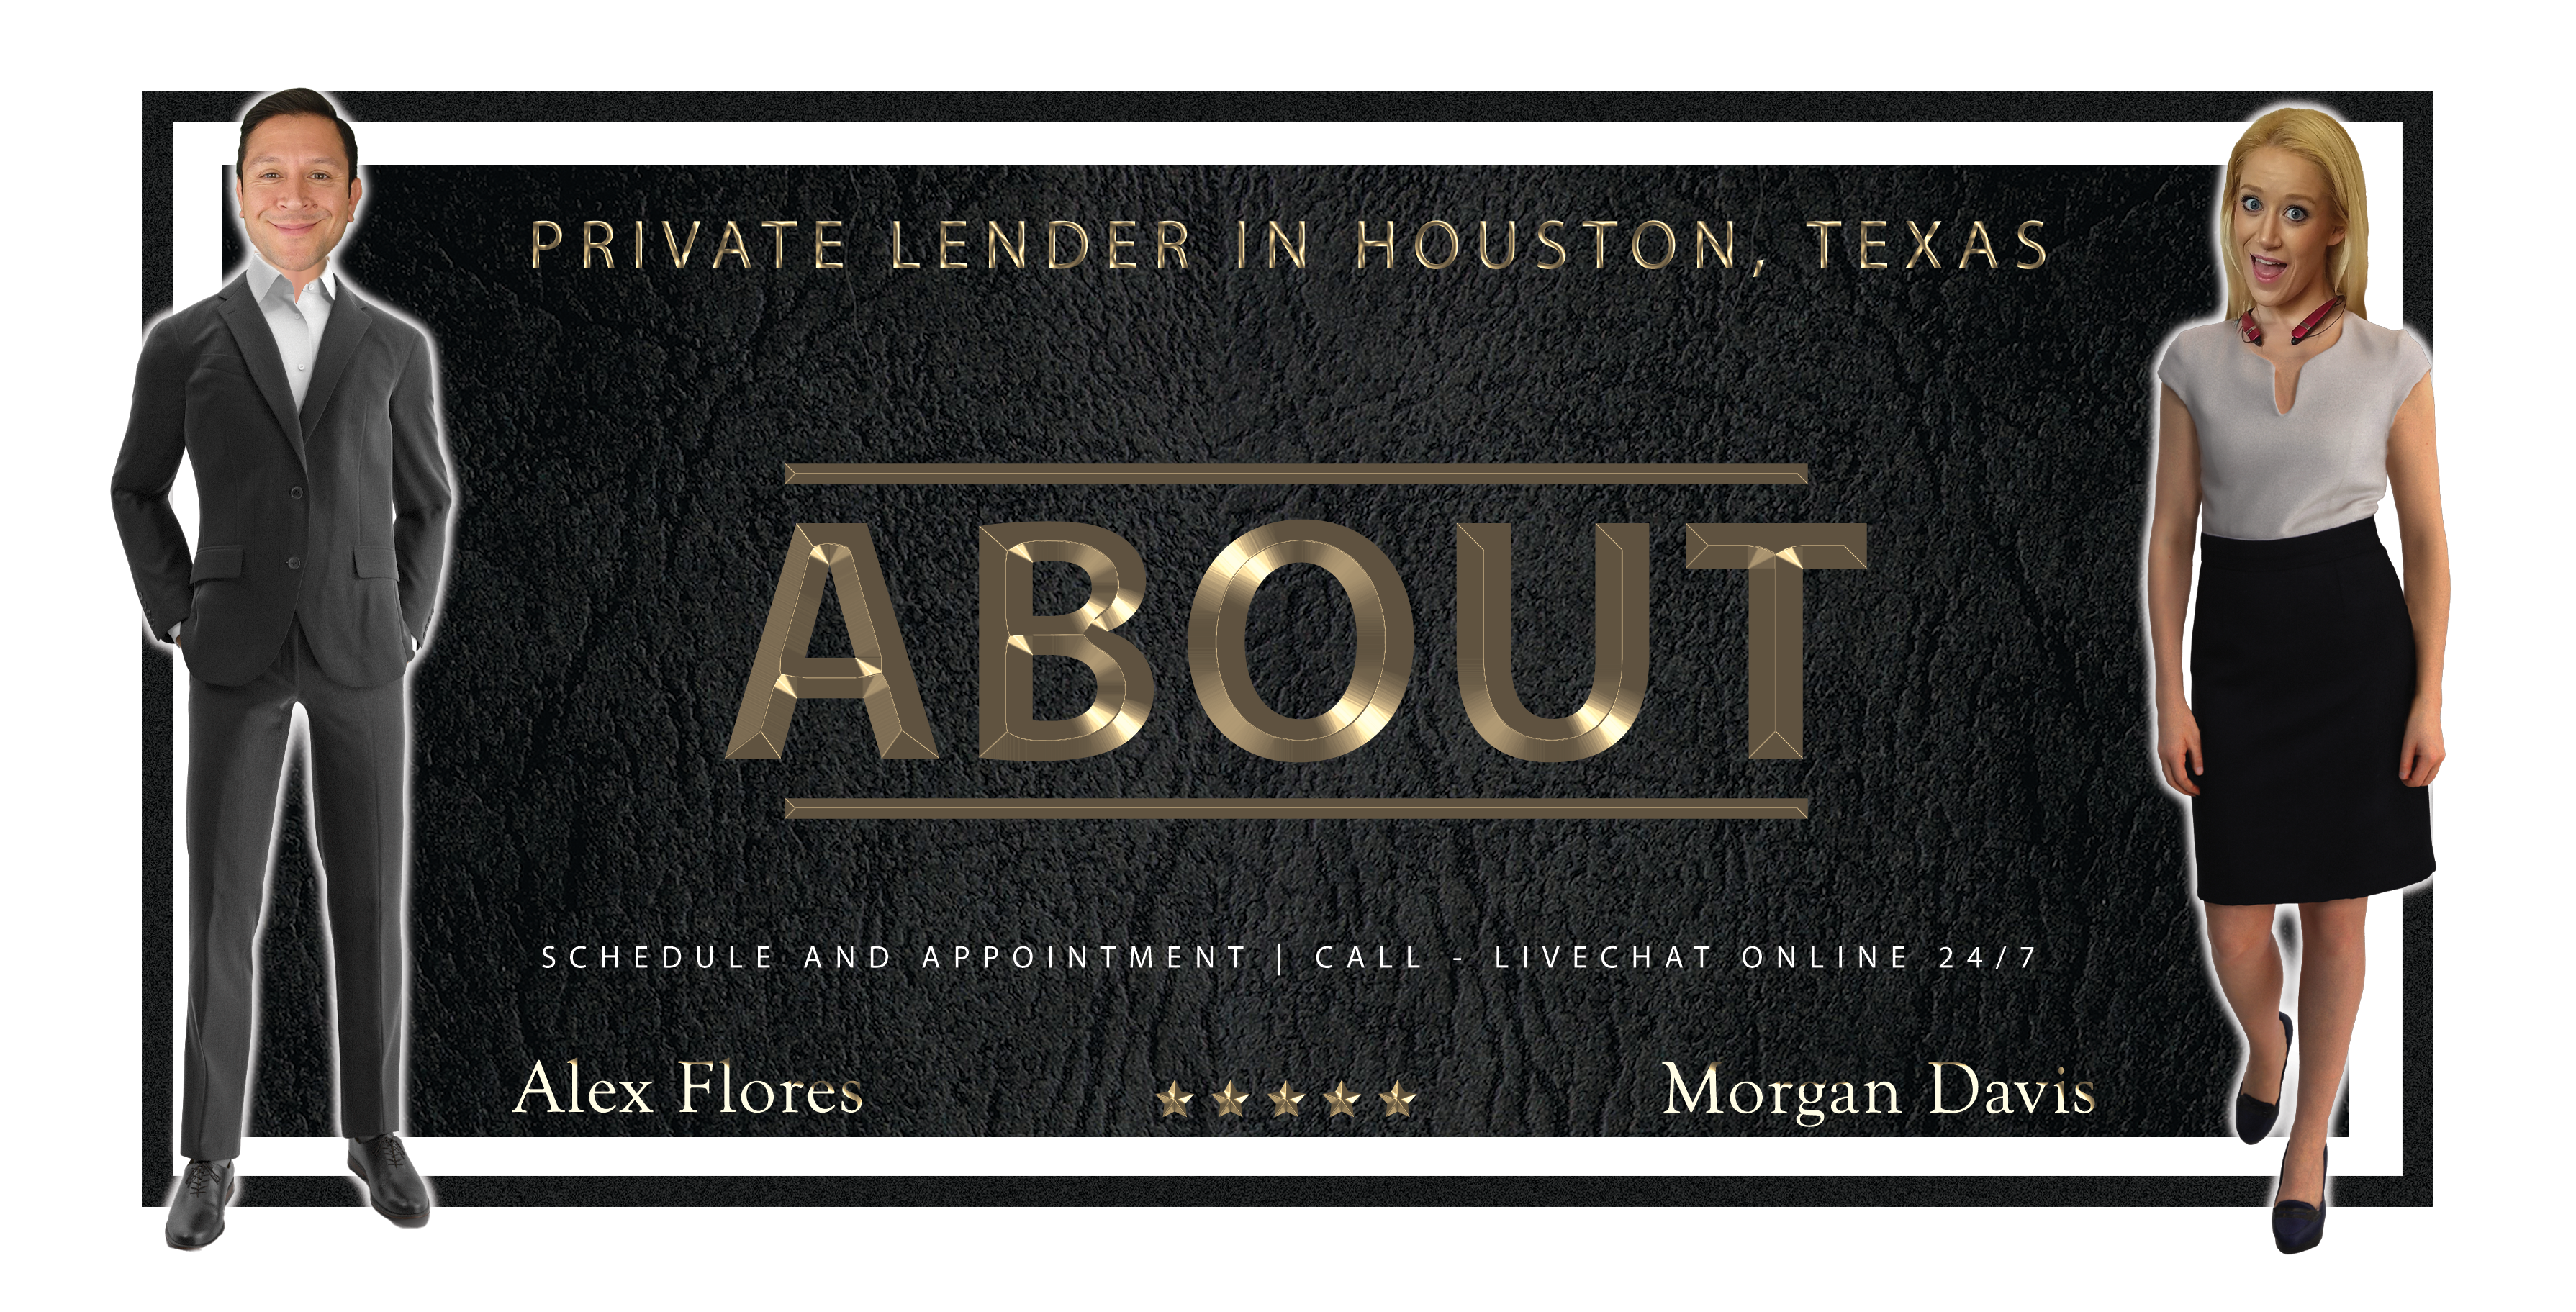 About private lender for real estate investors in houston texas